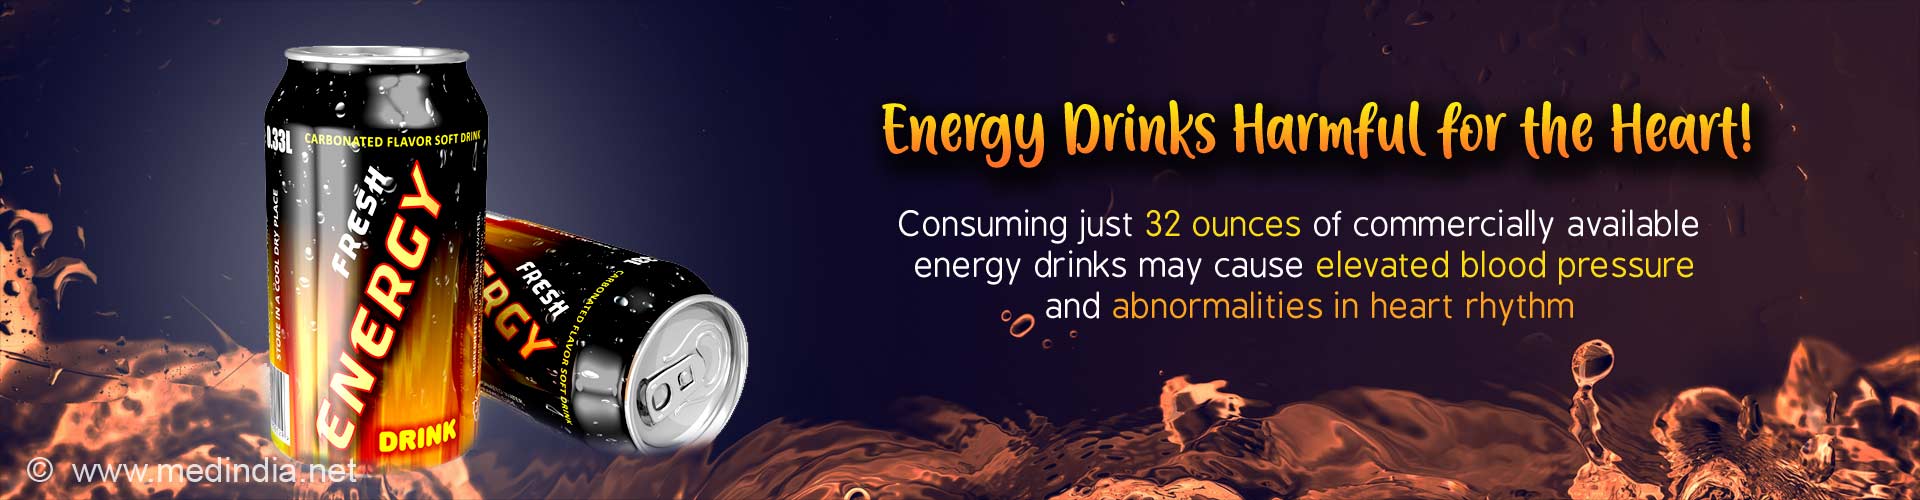 Energy drinks harmful for the heart. Consuming just 32 ounces of commercially available energy drinks may cause elevated blood pressure and abnormalities in heart rhythm.